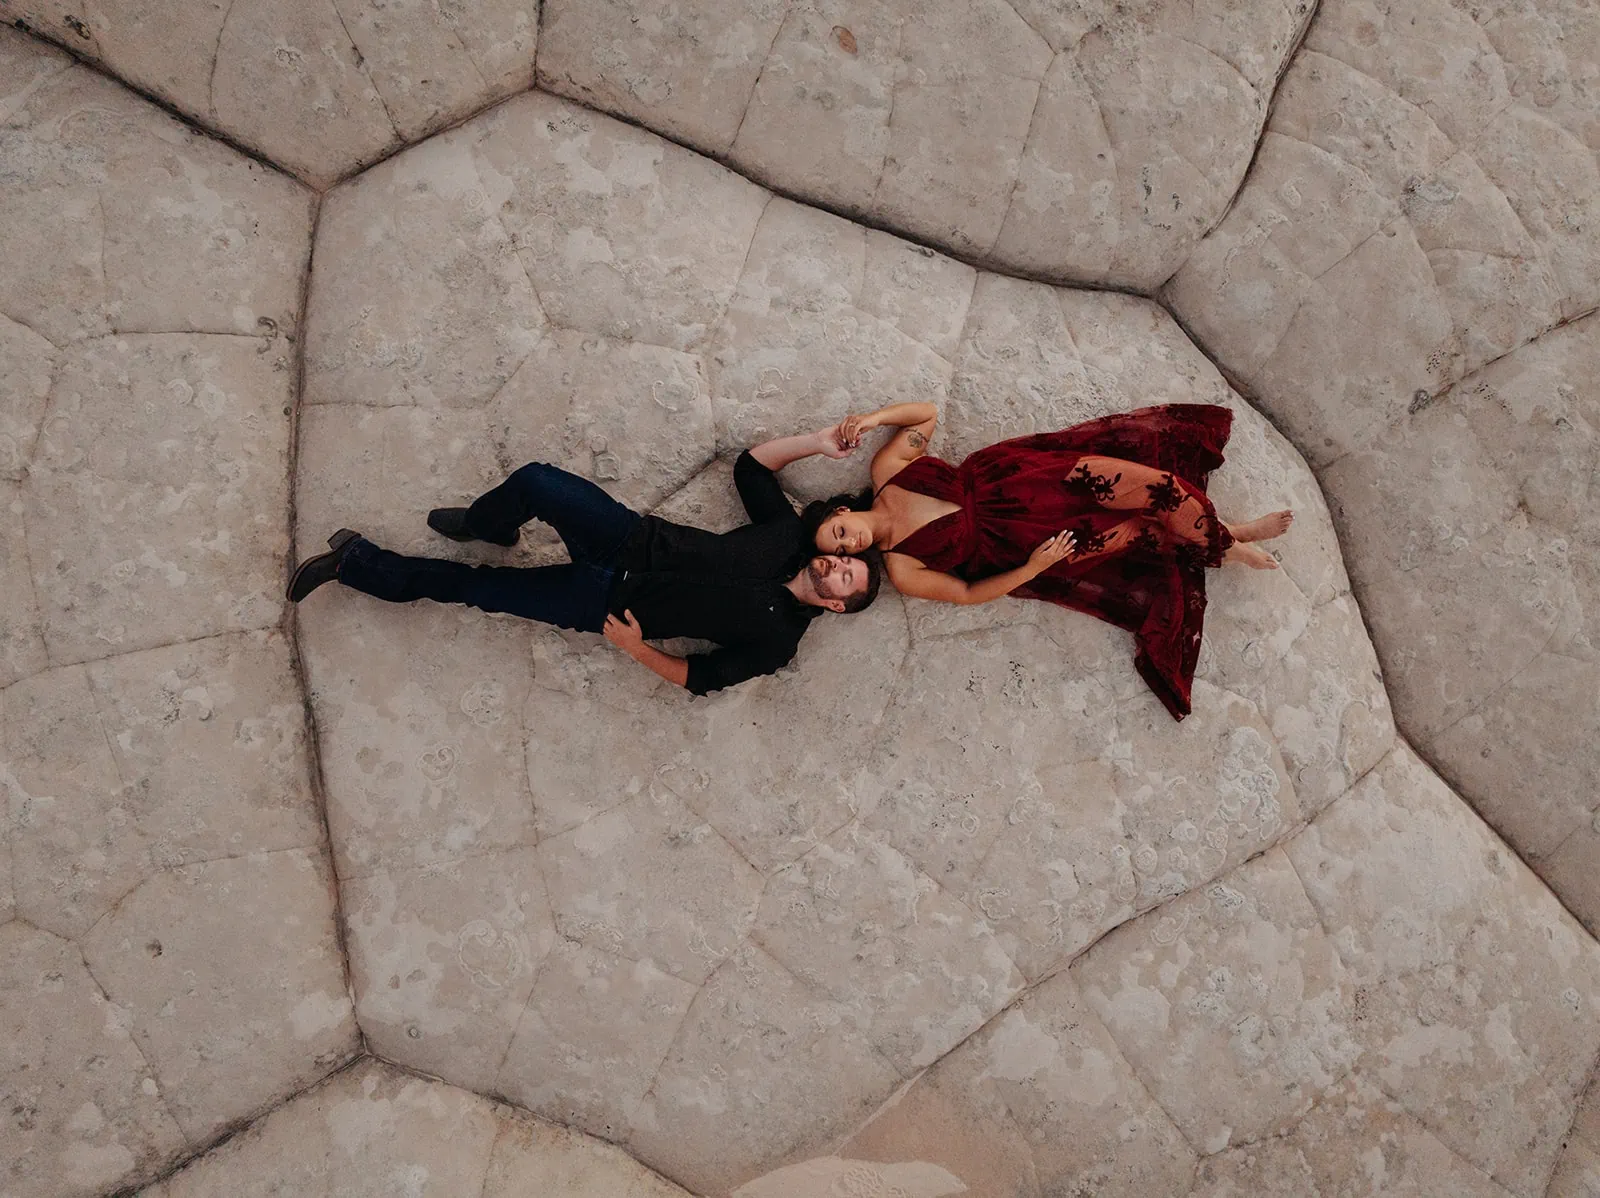 A bride and groom lay together in the desert.